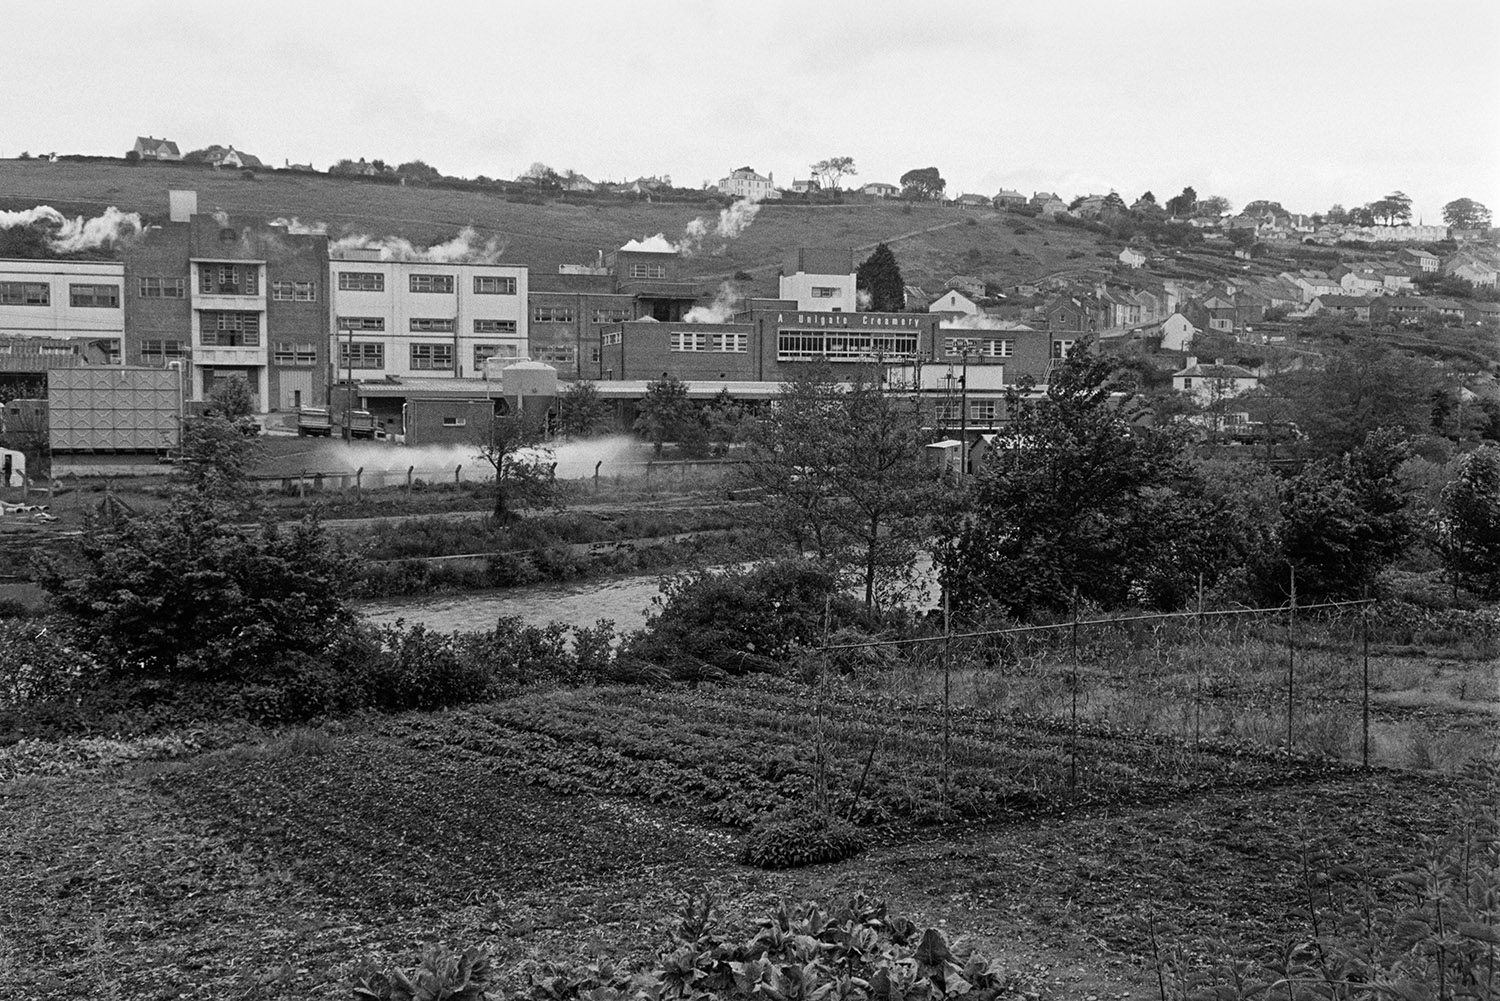 Allotments by the River Torridge in Torrington. The Unigate Creamery buildings can be seen in the background on the opposite side of the river.